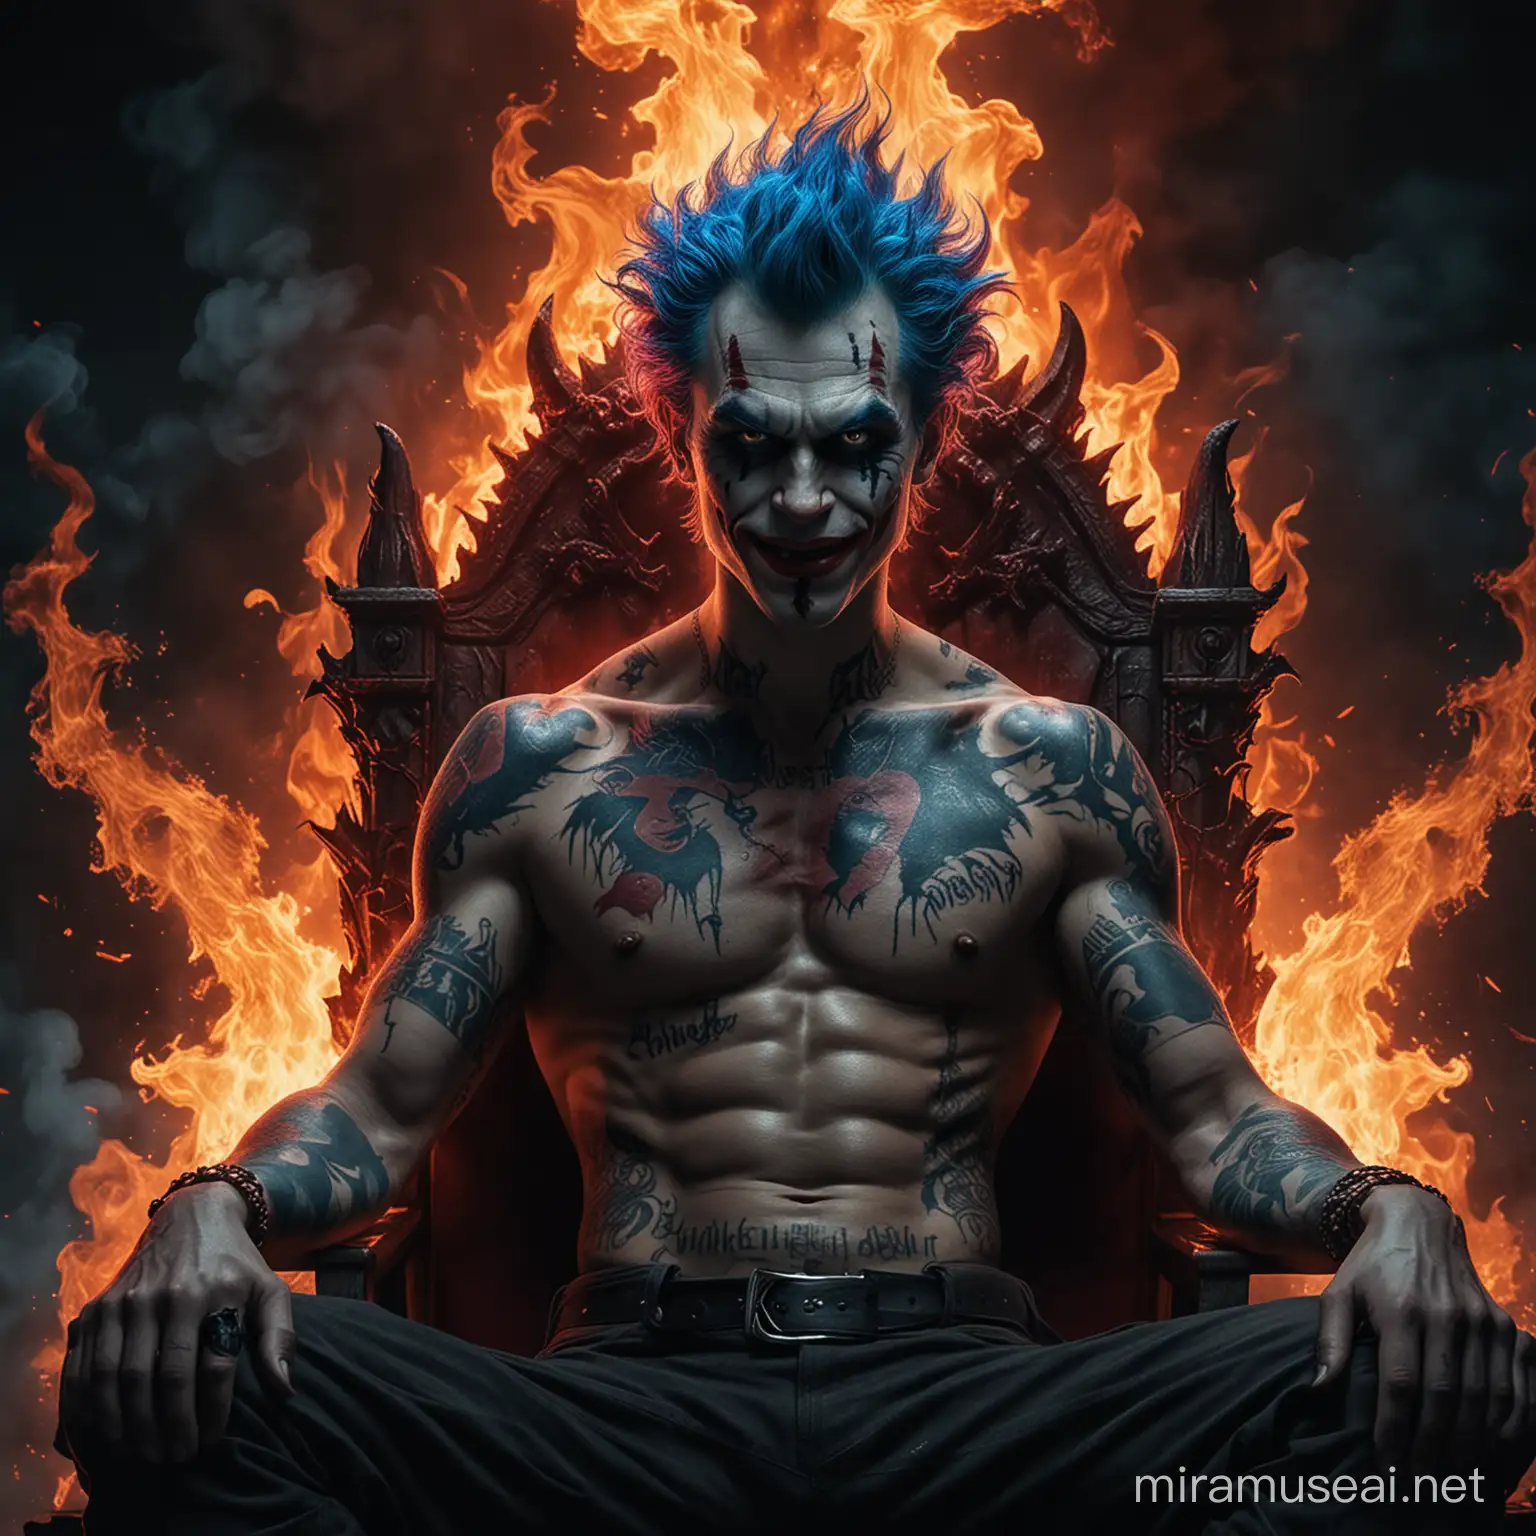 Cinematic Joker with Red Dragon Tattoos in Hell Throne Scene